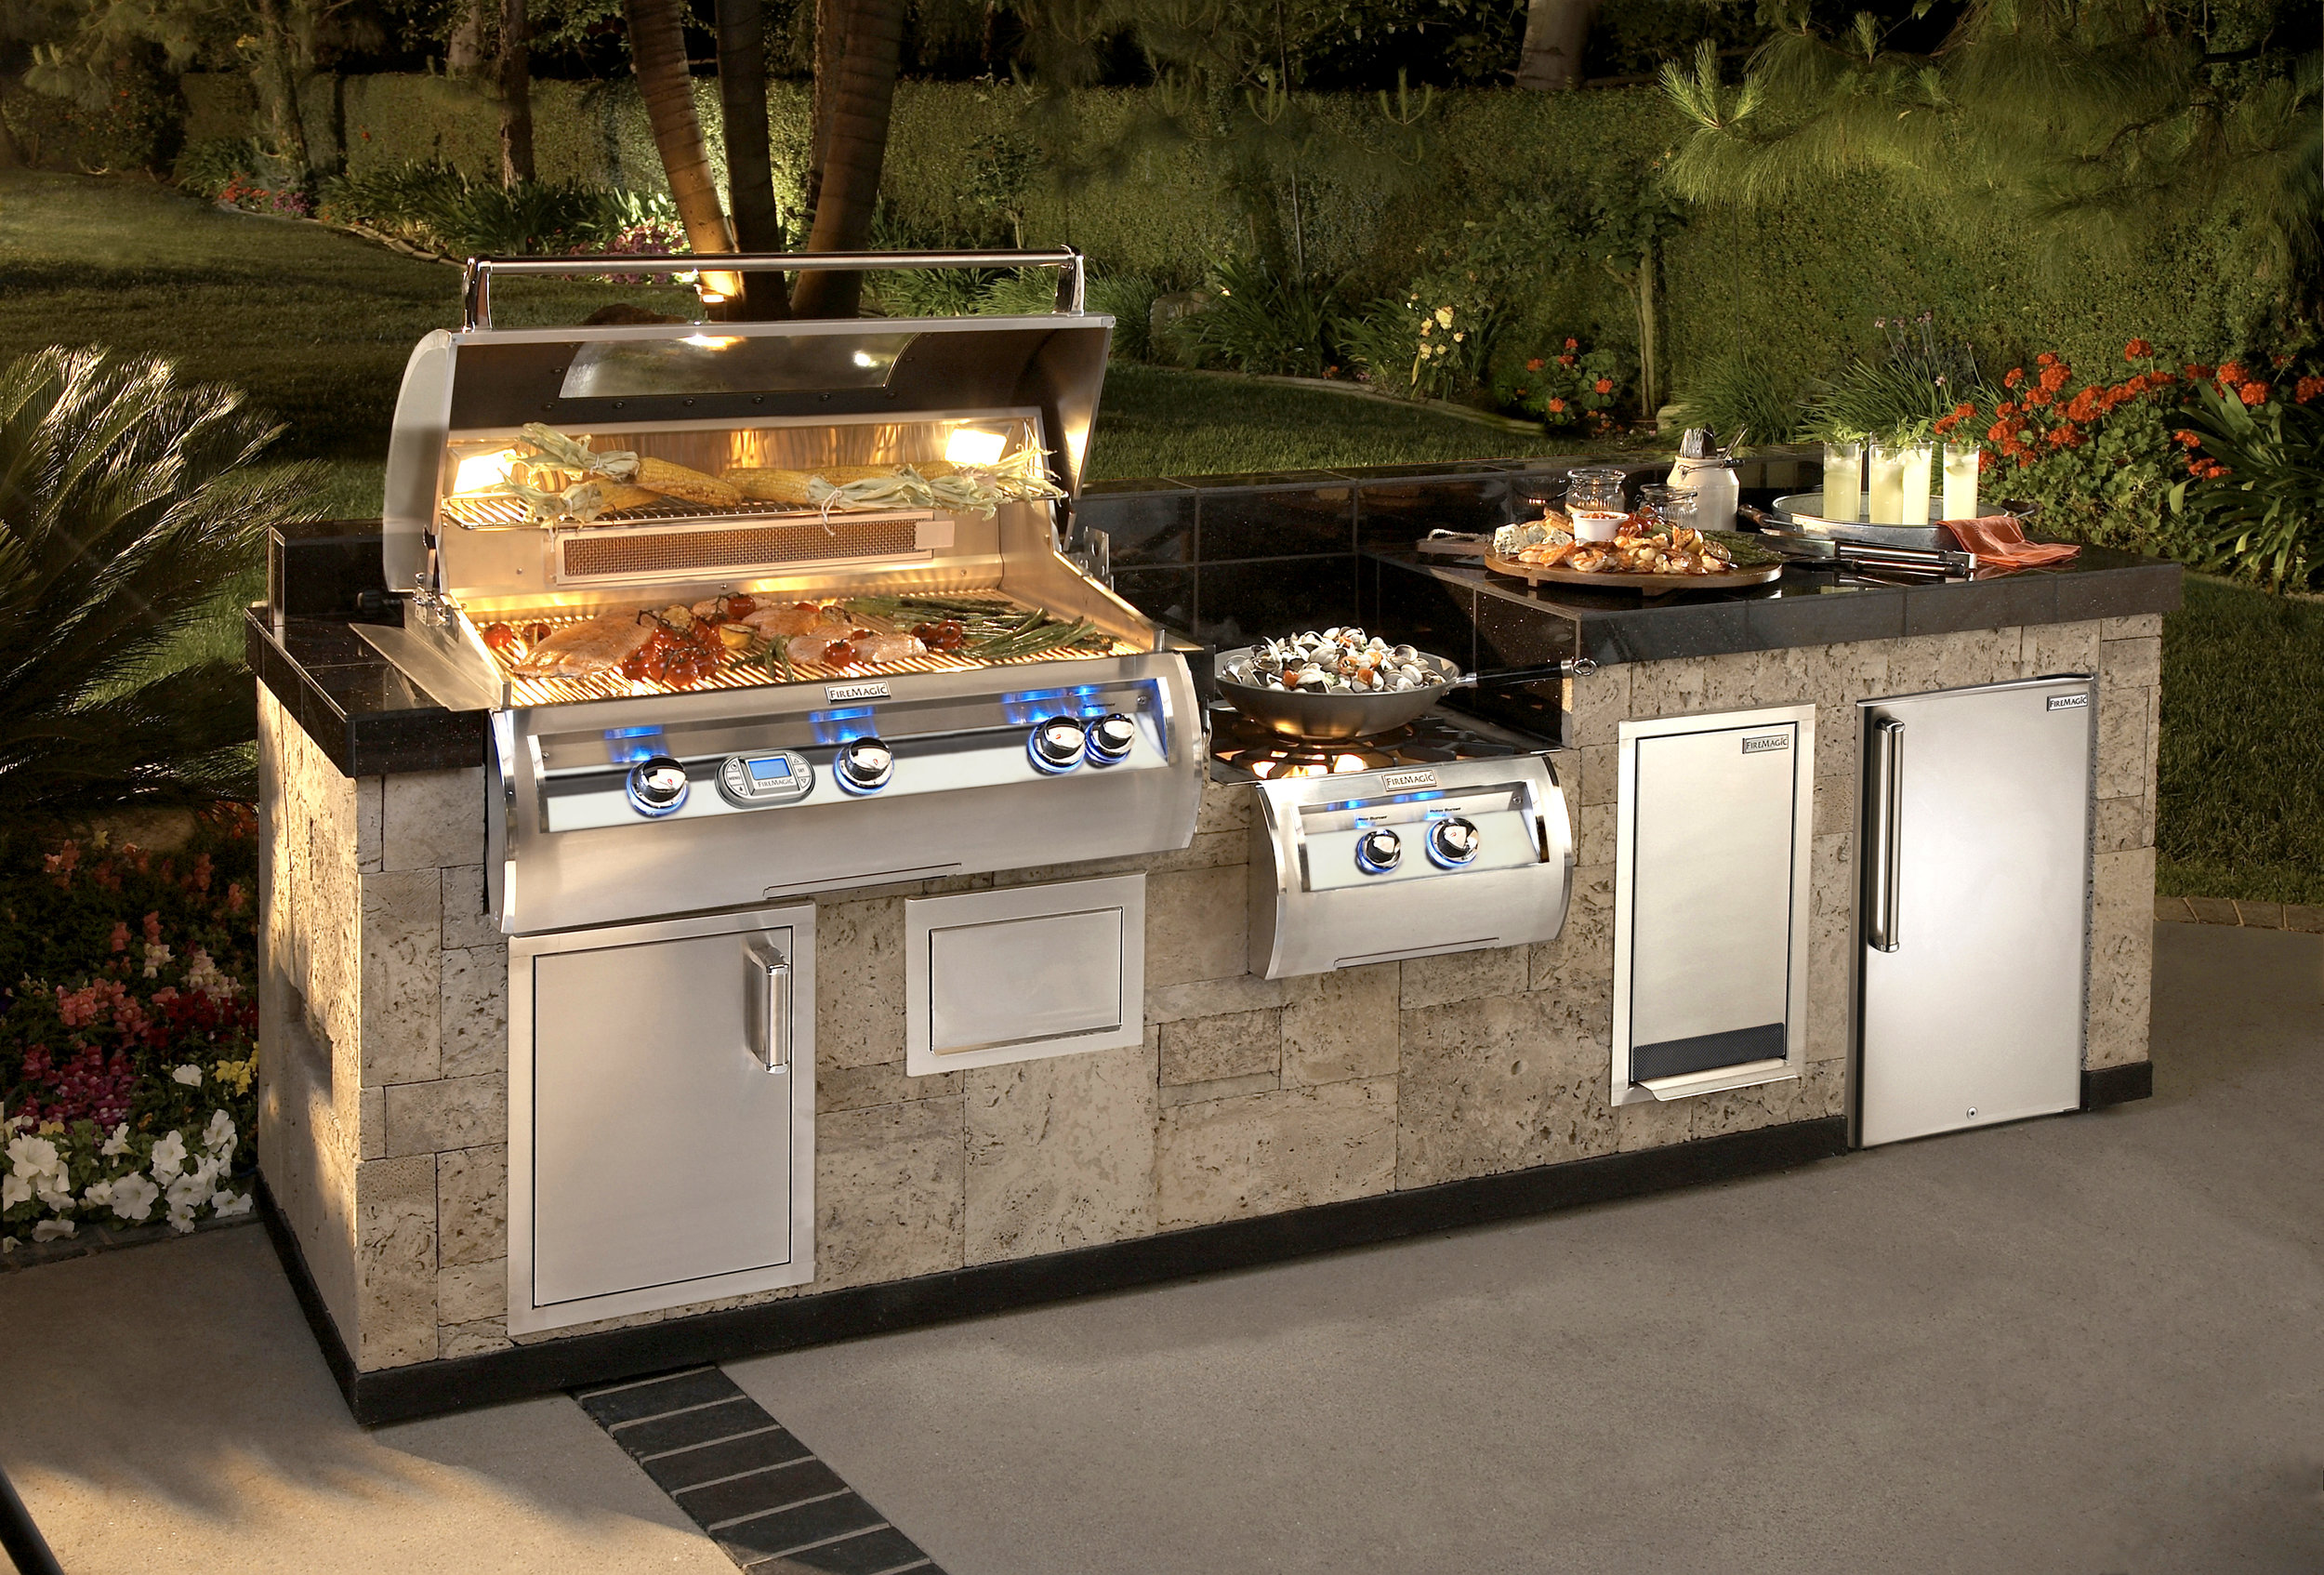 Fire Magic Grills & Appliances Oasis Stone Works